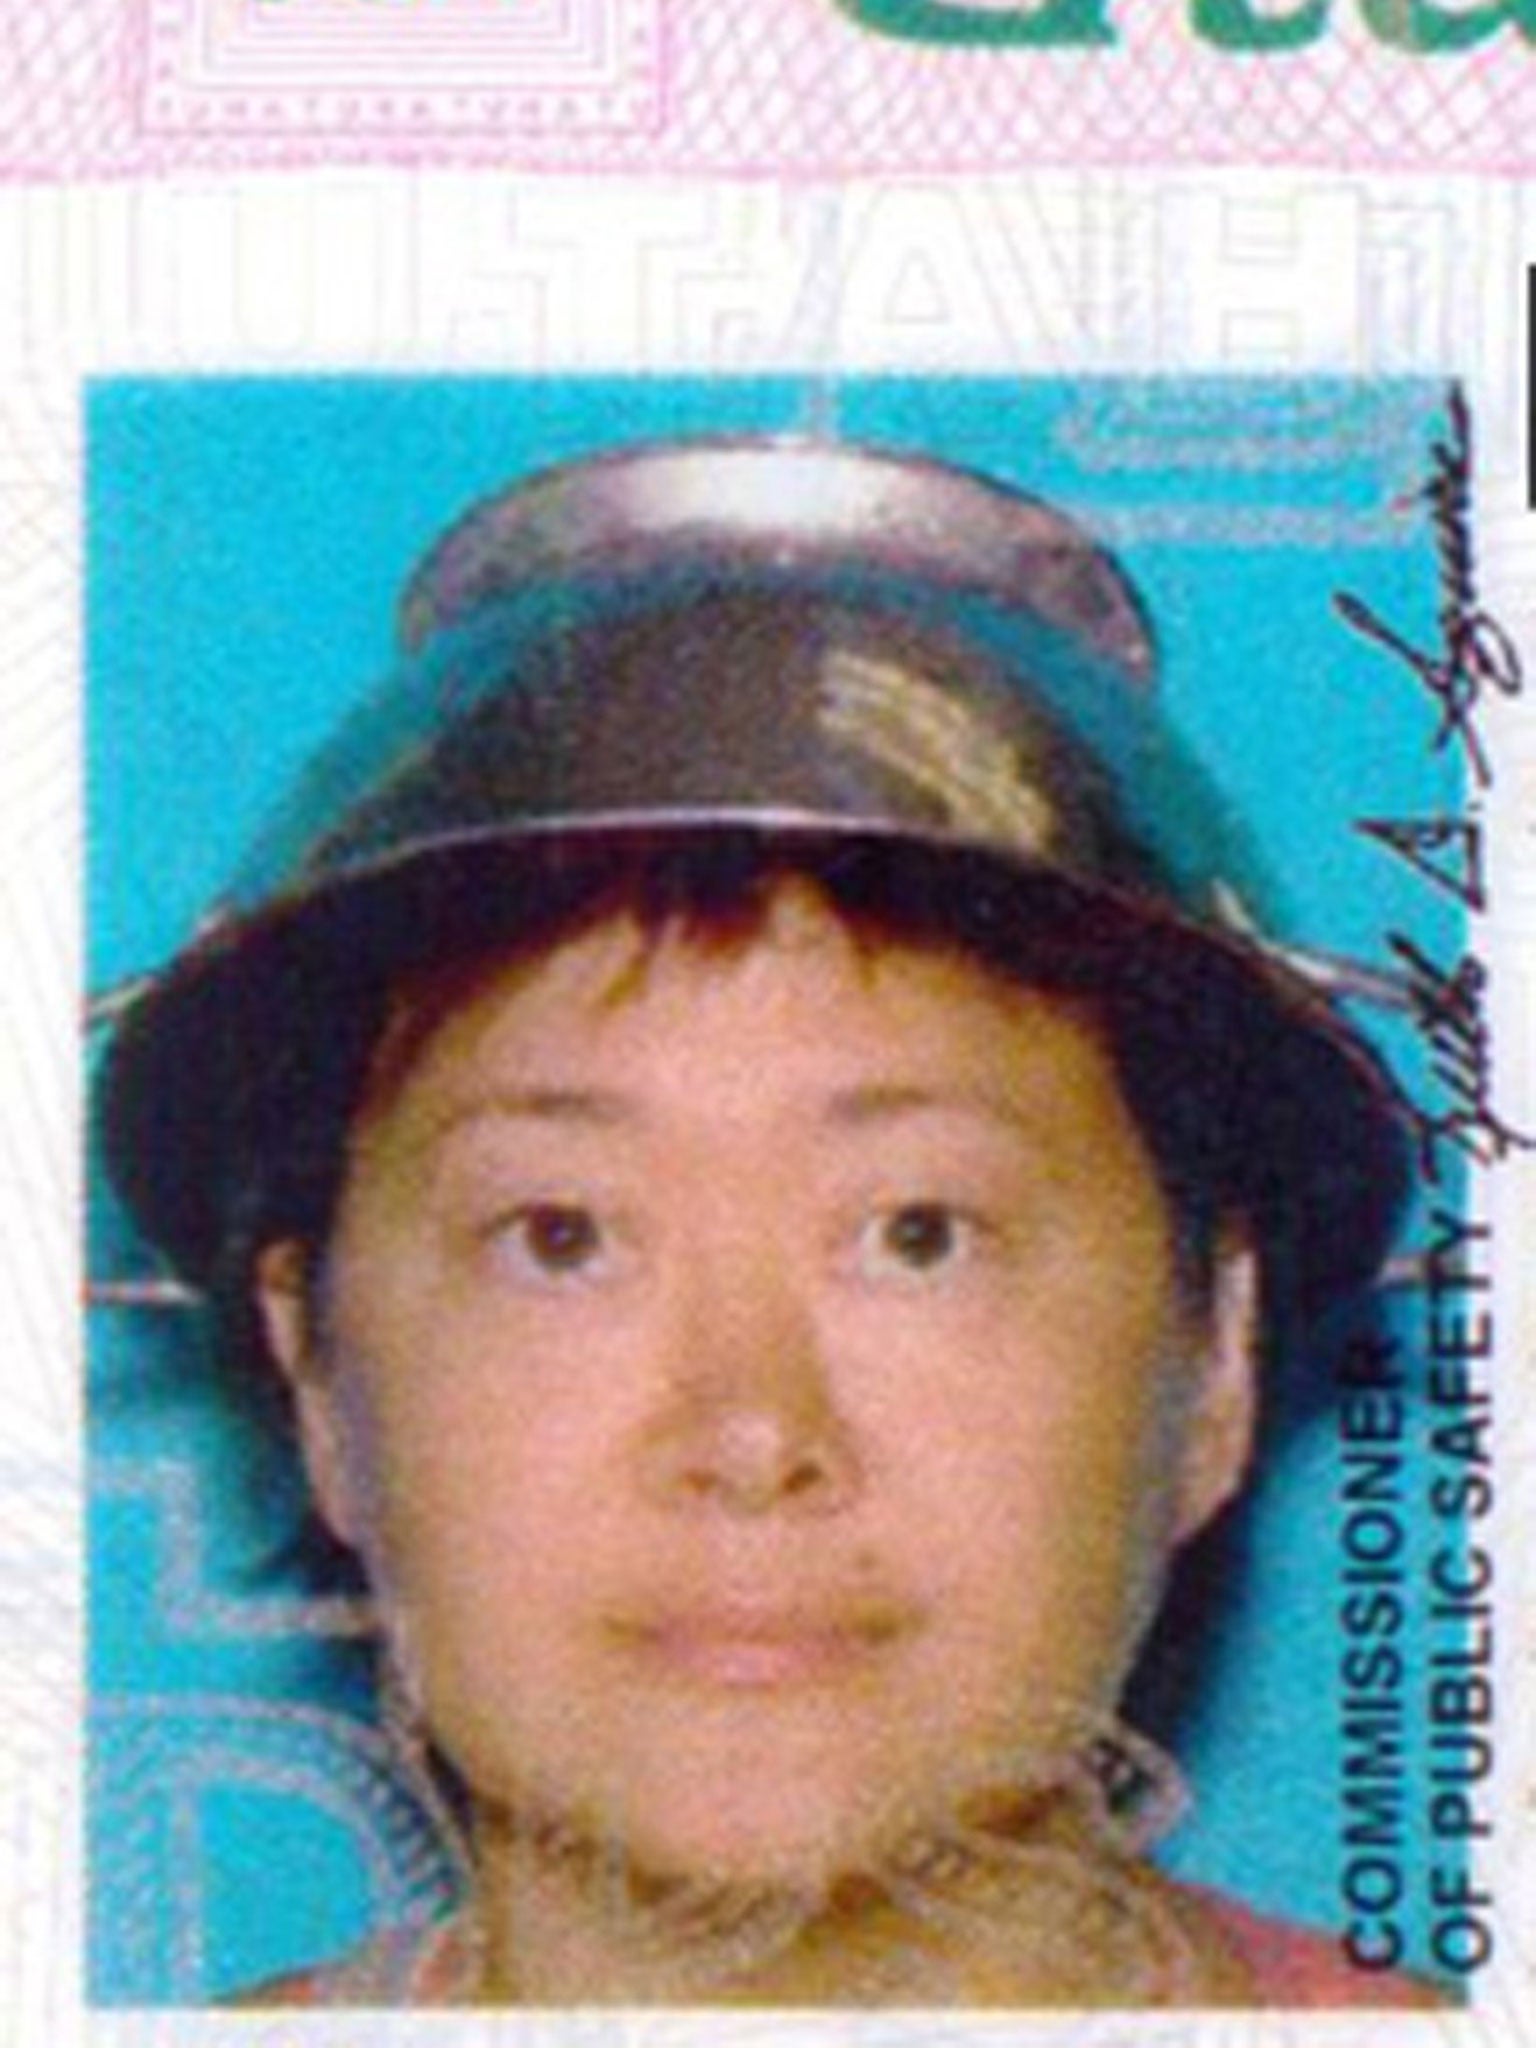 Asia Lemmon, whose legal name appears on her driverís license as Jessica Steinhauser, is shown wearing a metal colander on her head on her Utah driver's license in this undated photo